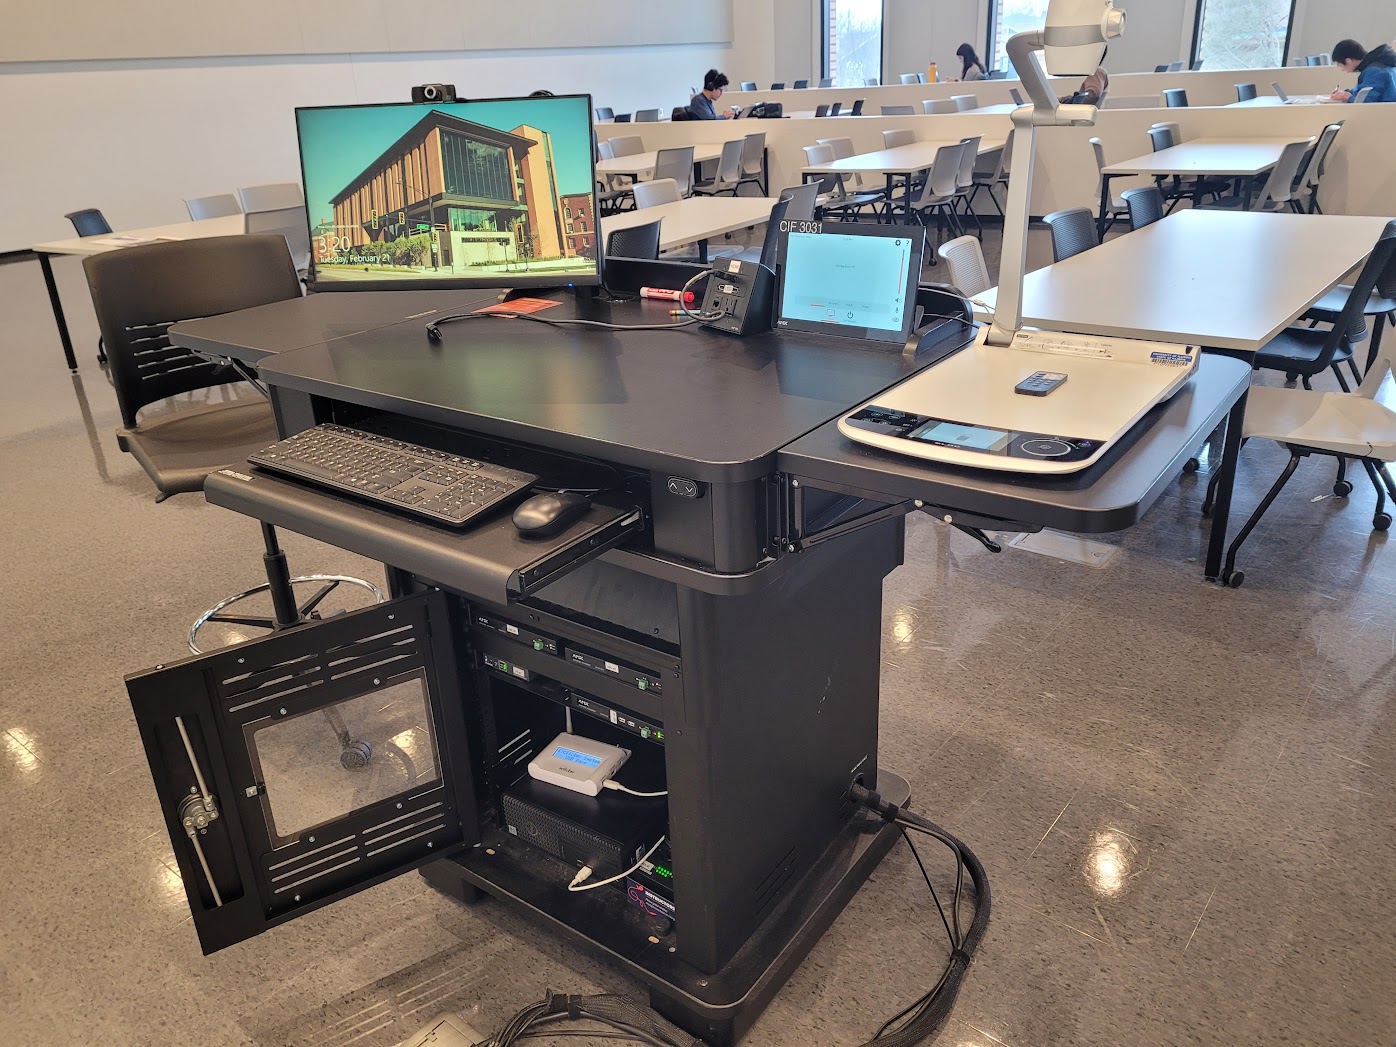 The instructor lectern with the control panel, microphones, and monitor on top and the PC, iClicker Base Station, and sound equipment inside.